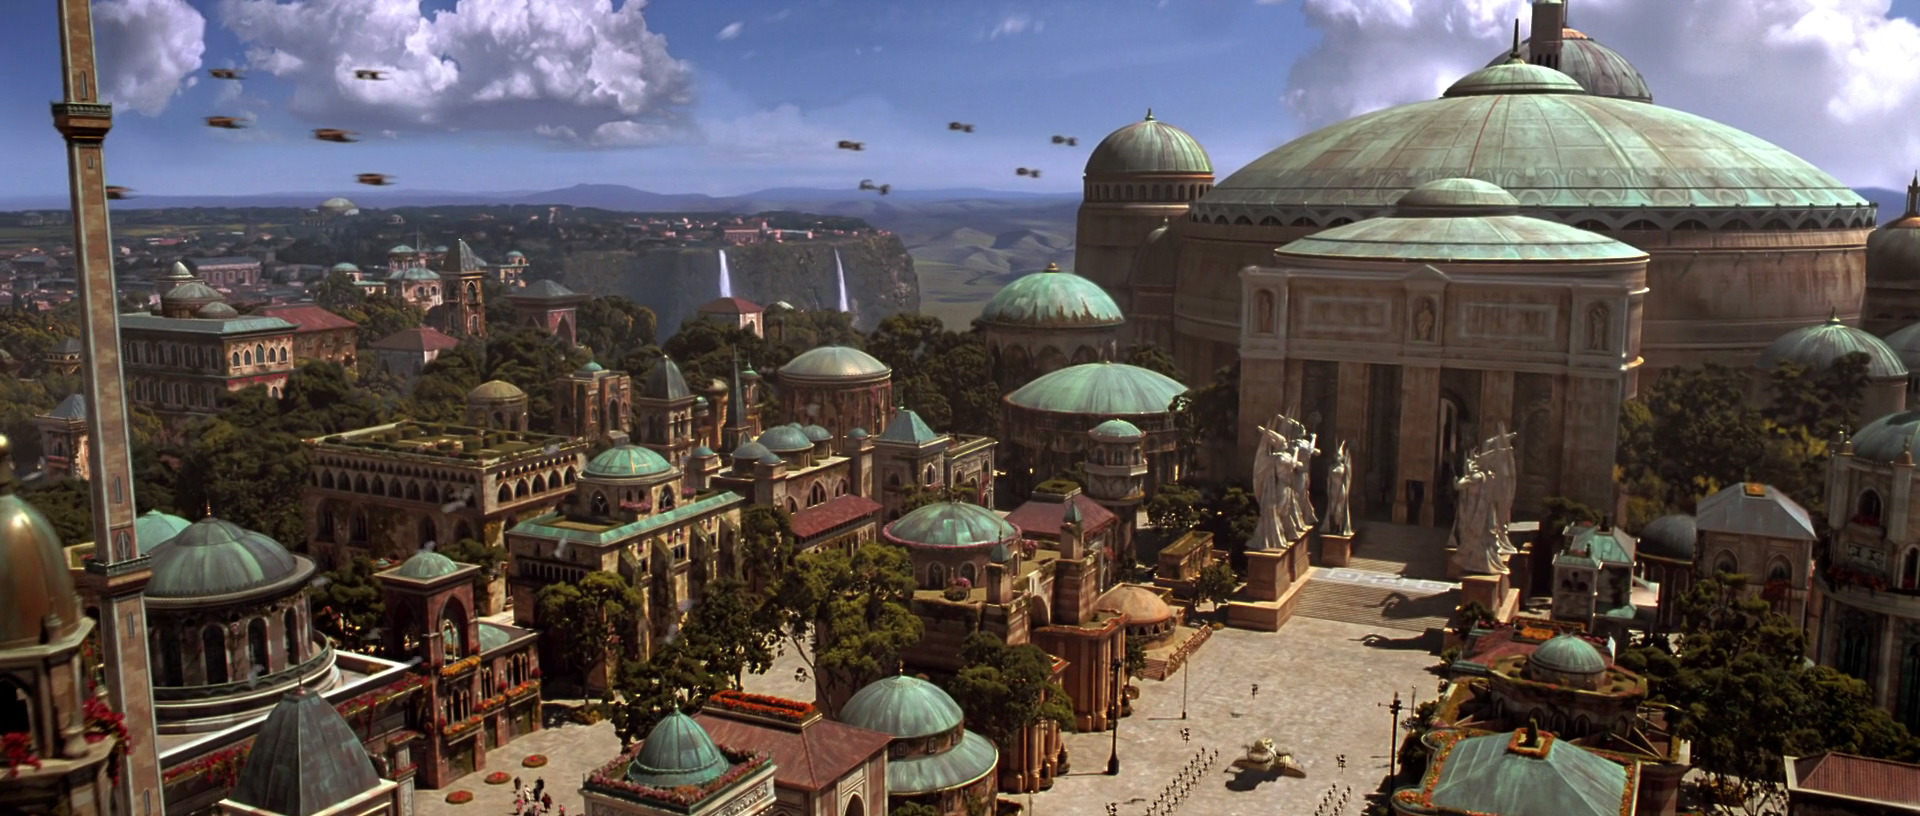 Star Wars: The Force Awakens - What Happened To Naboo After Return of the Jedi?